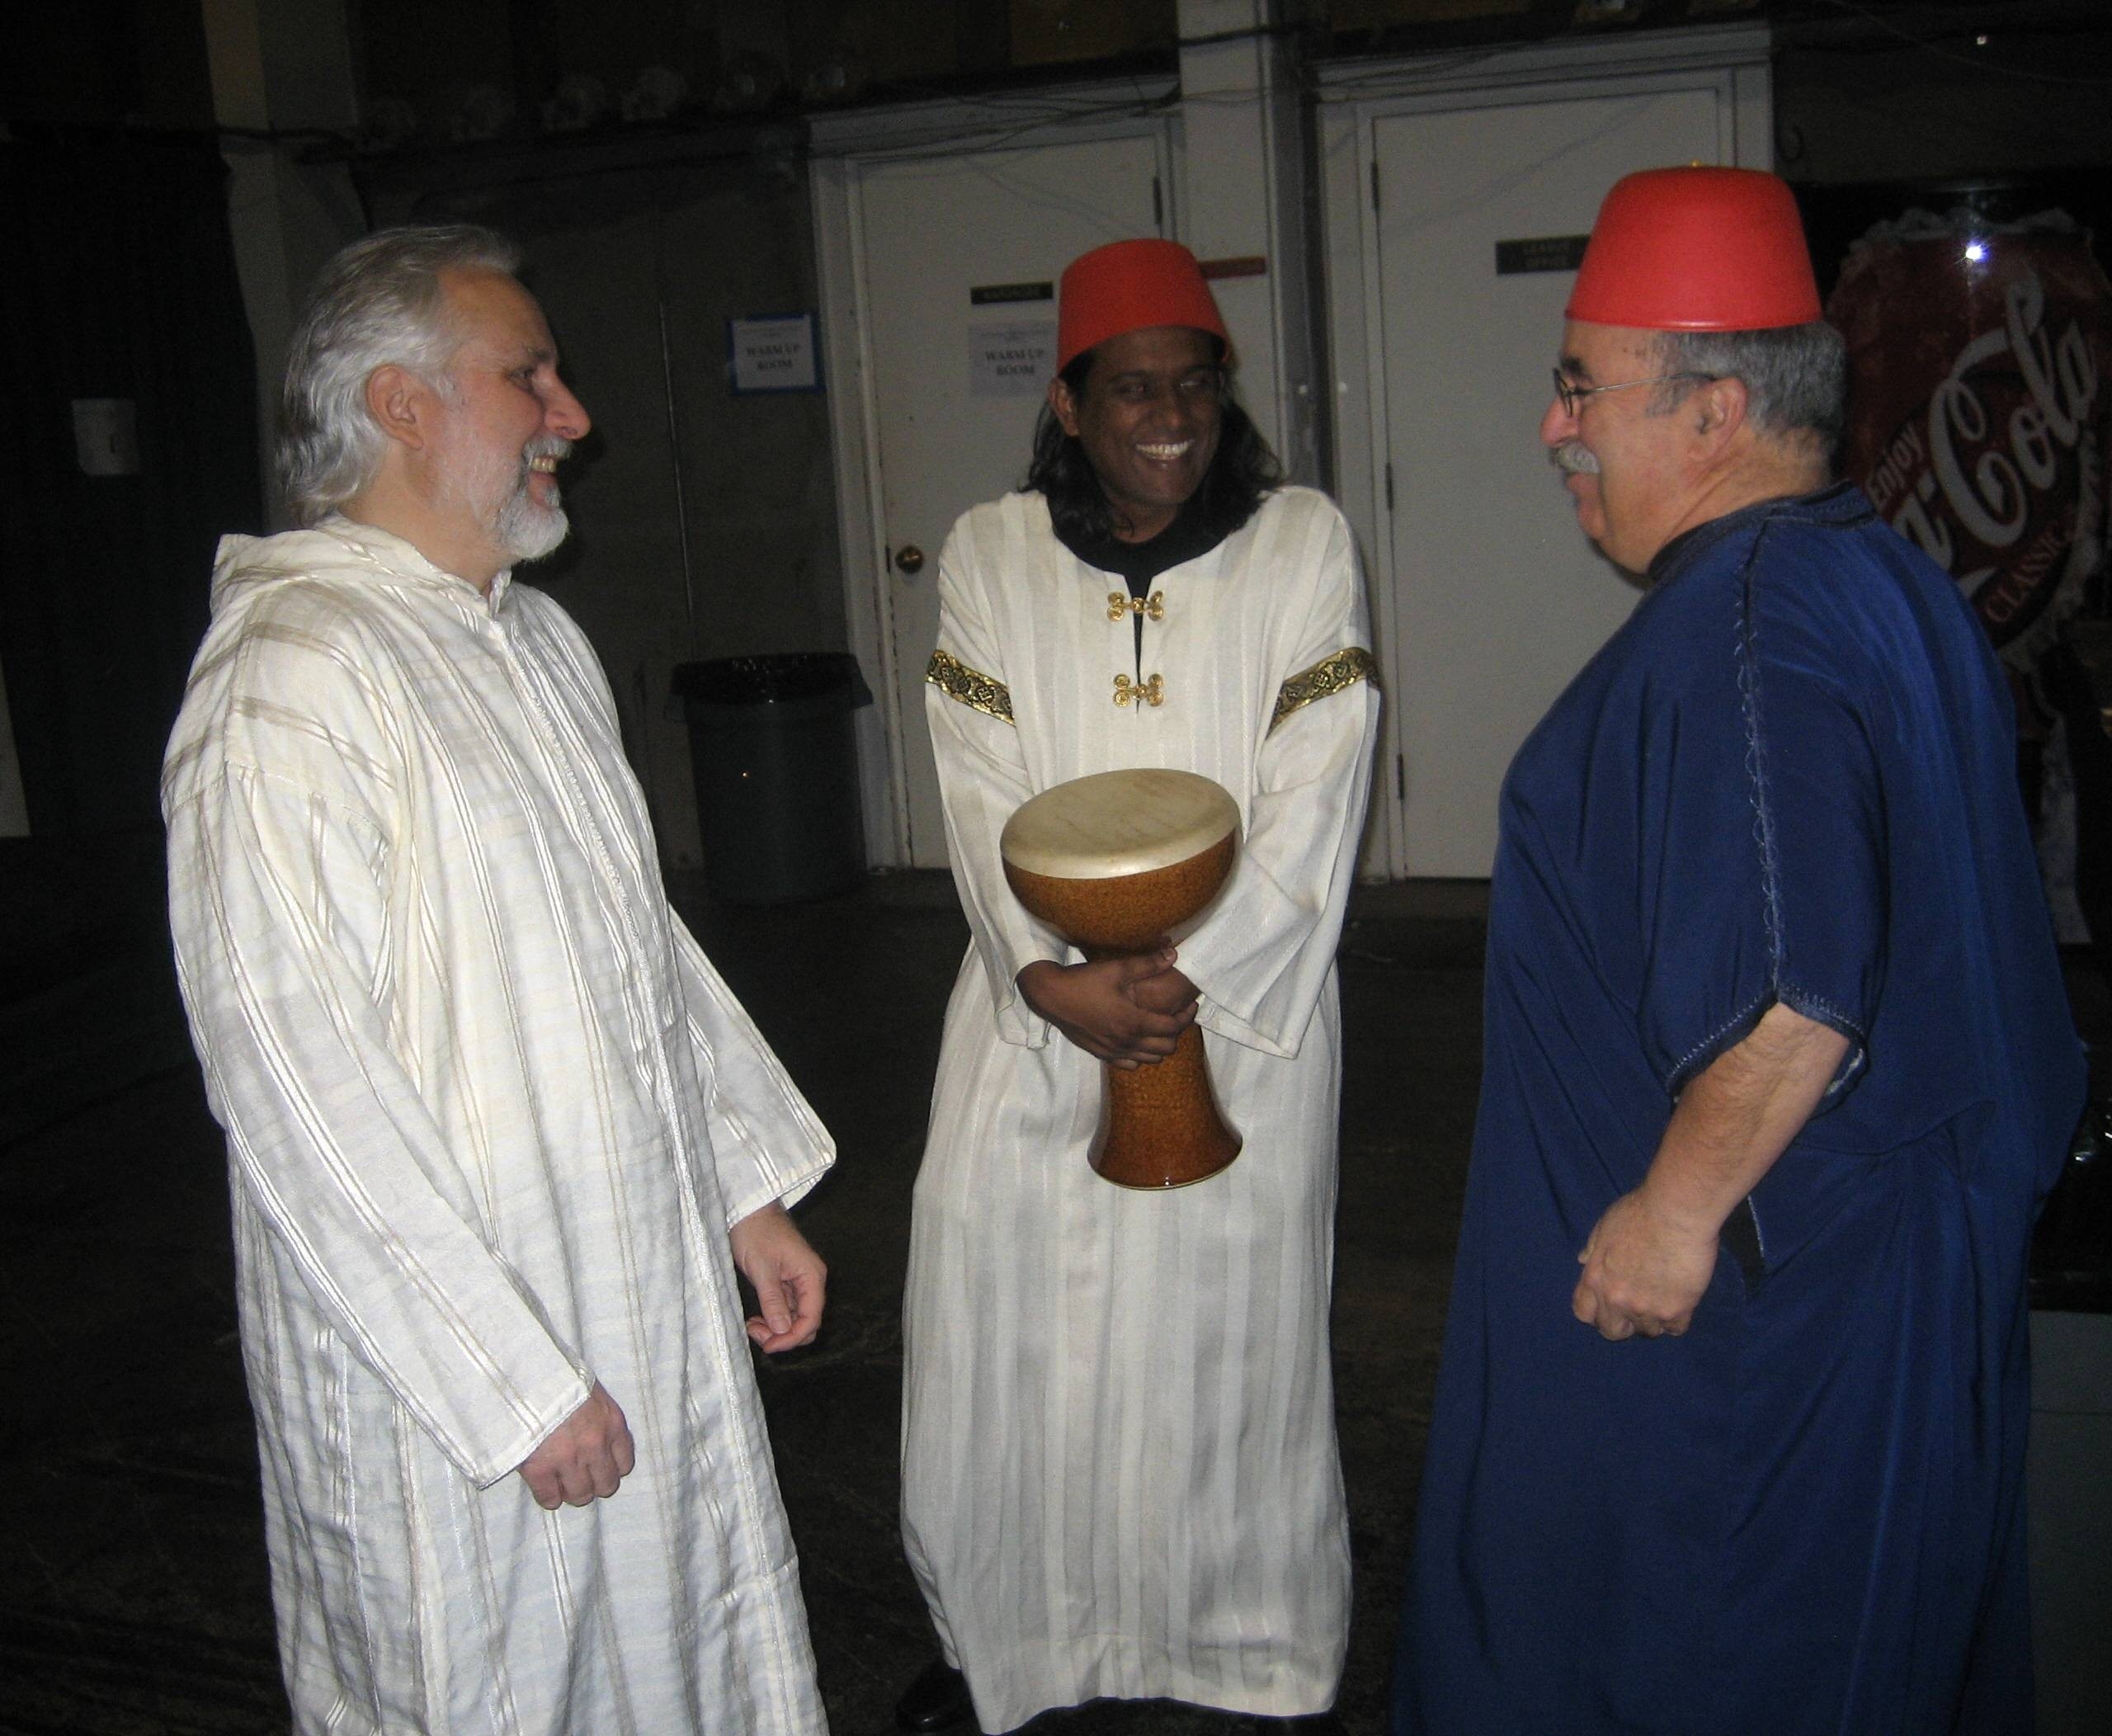 Nathan Craver, Zaid Ali, and Paul Ohanesian relaxing after a Zaffa Wedding Processional performance in SF, CA, June 2010. 